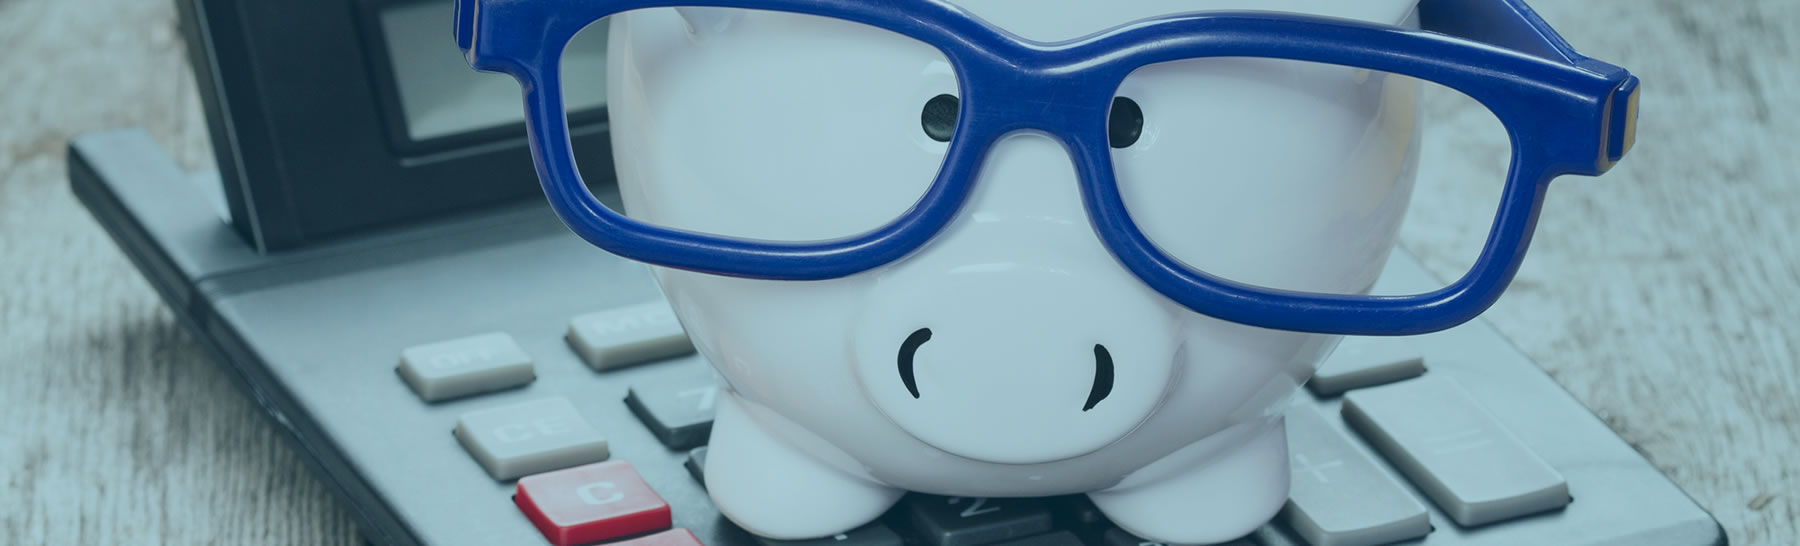  Piggy Bank With Glasses and Calculator